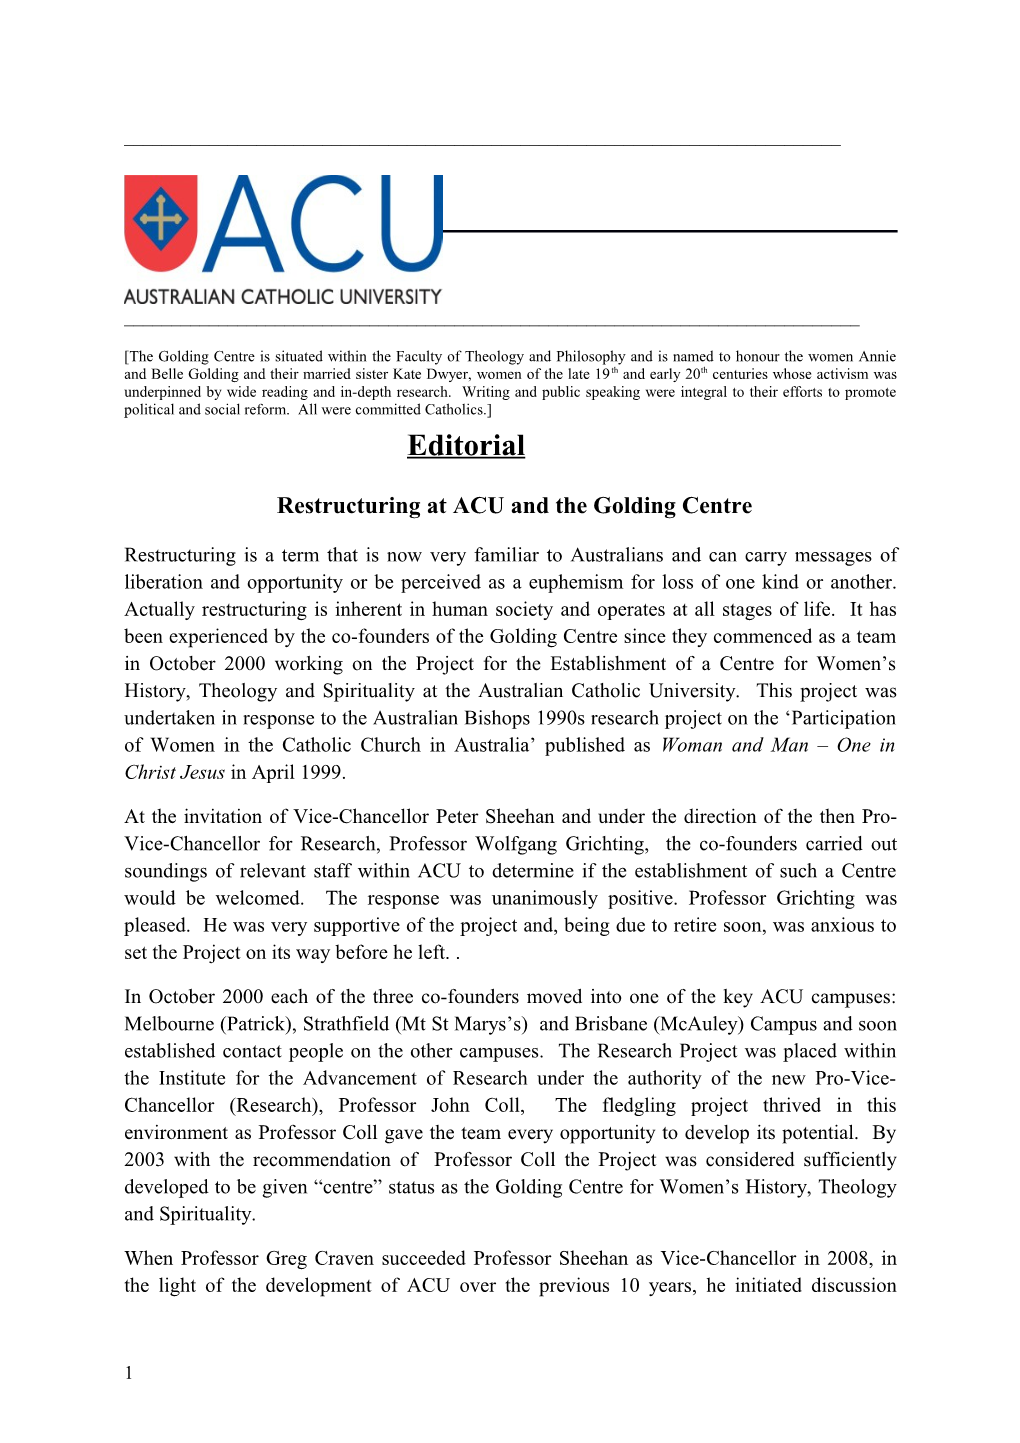 Restructuring at ACU and the Golding Centre